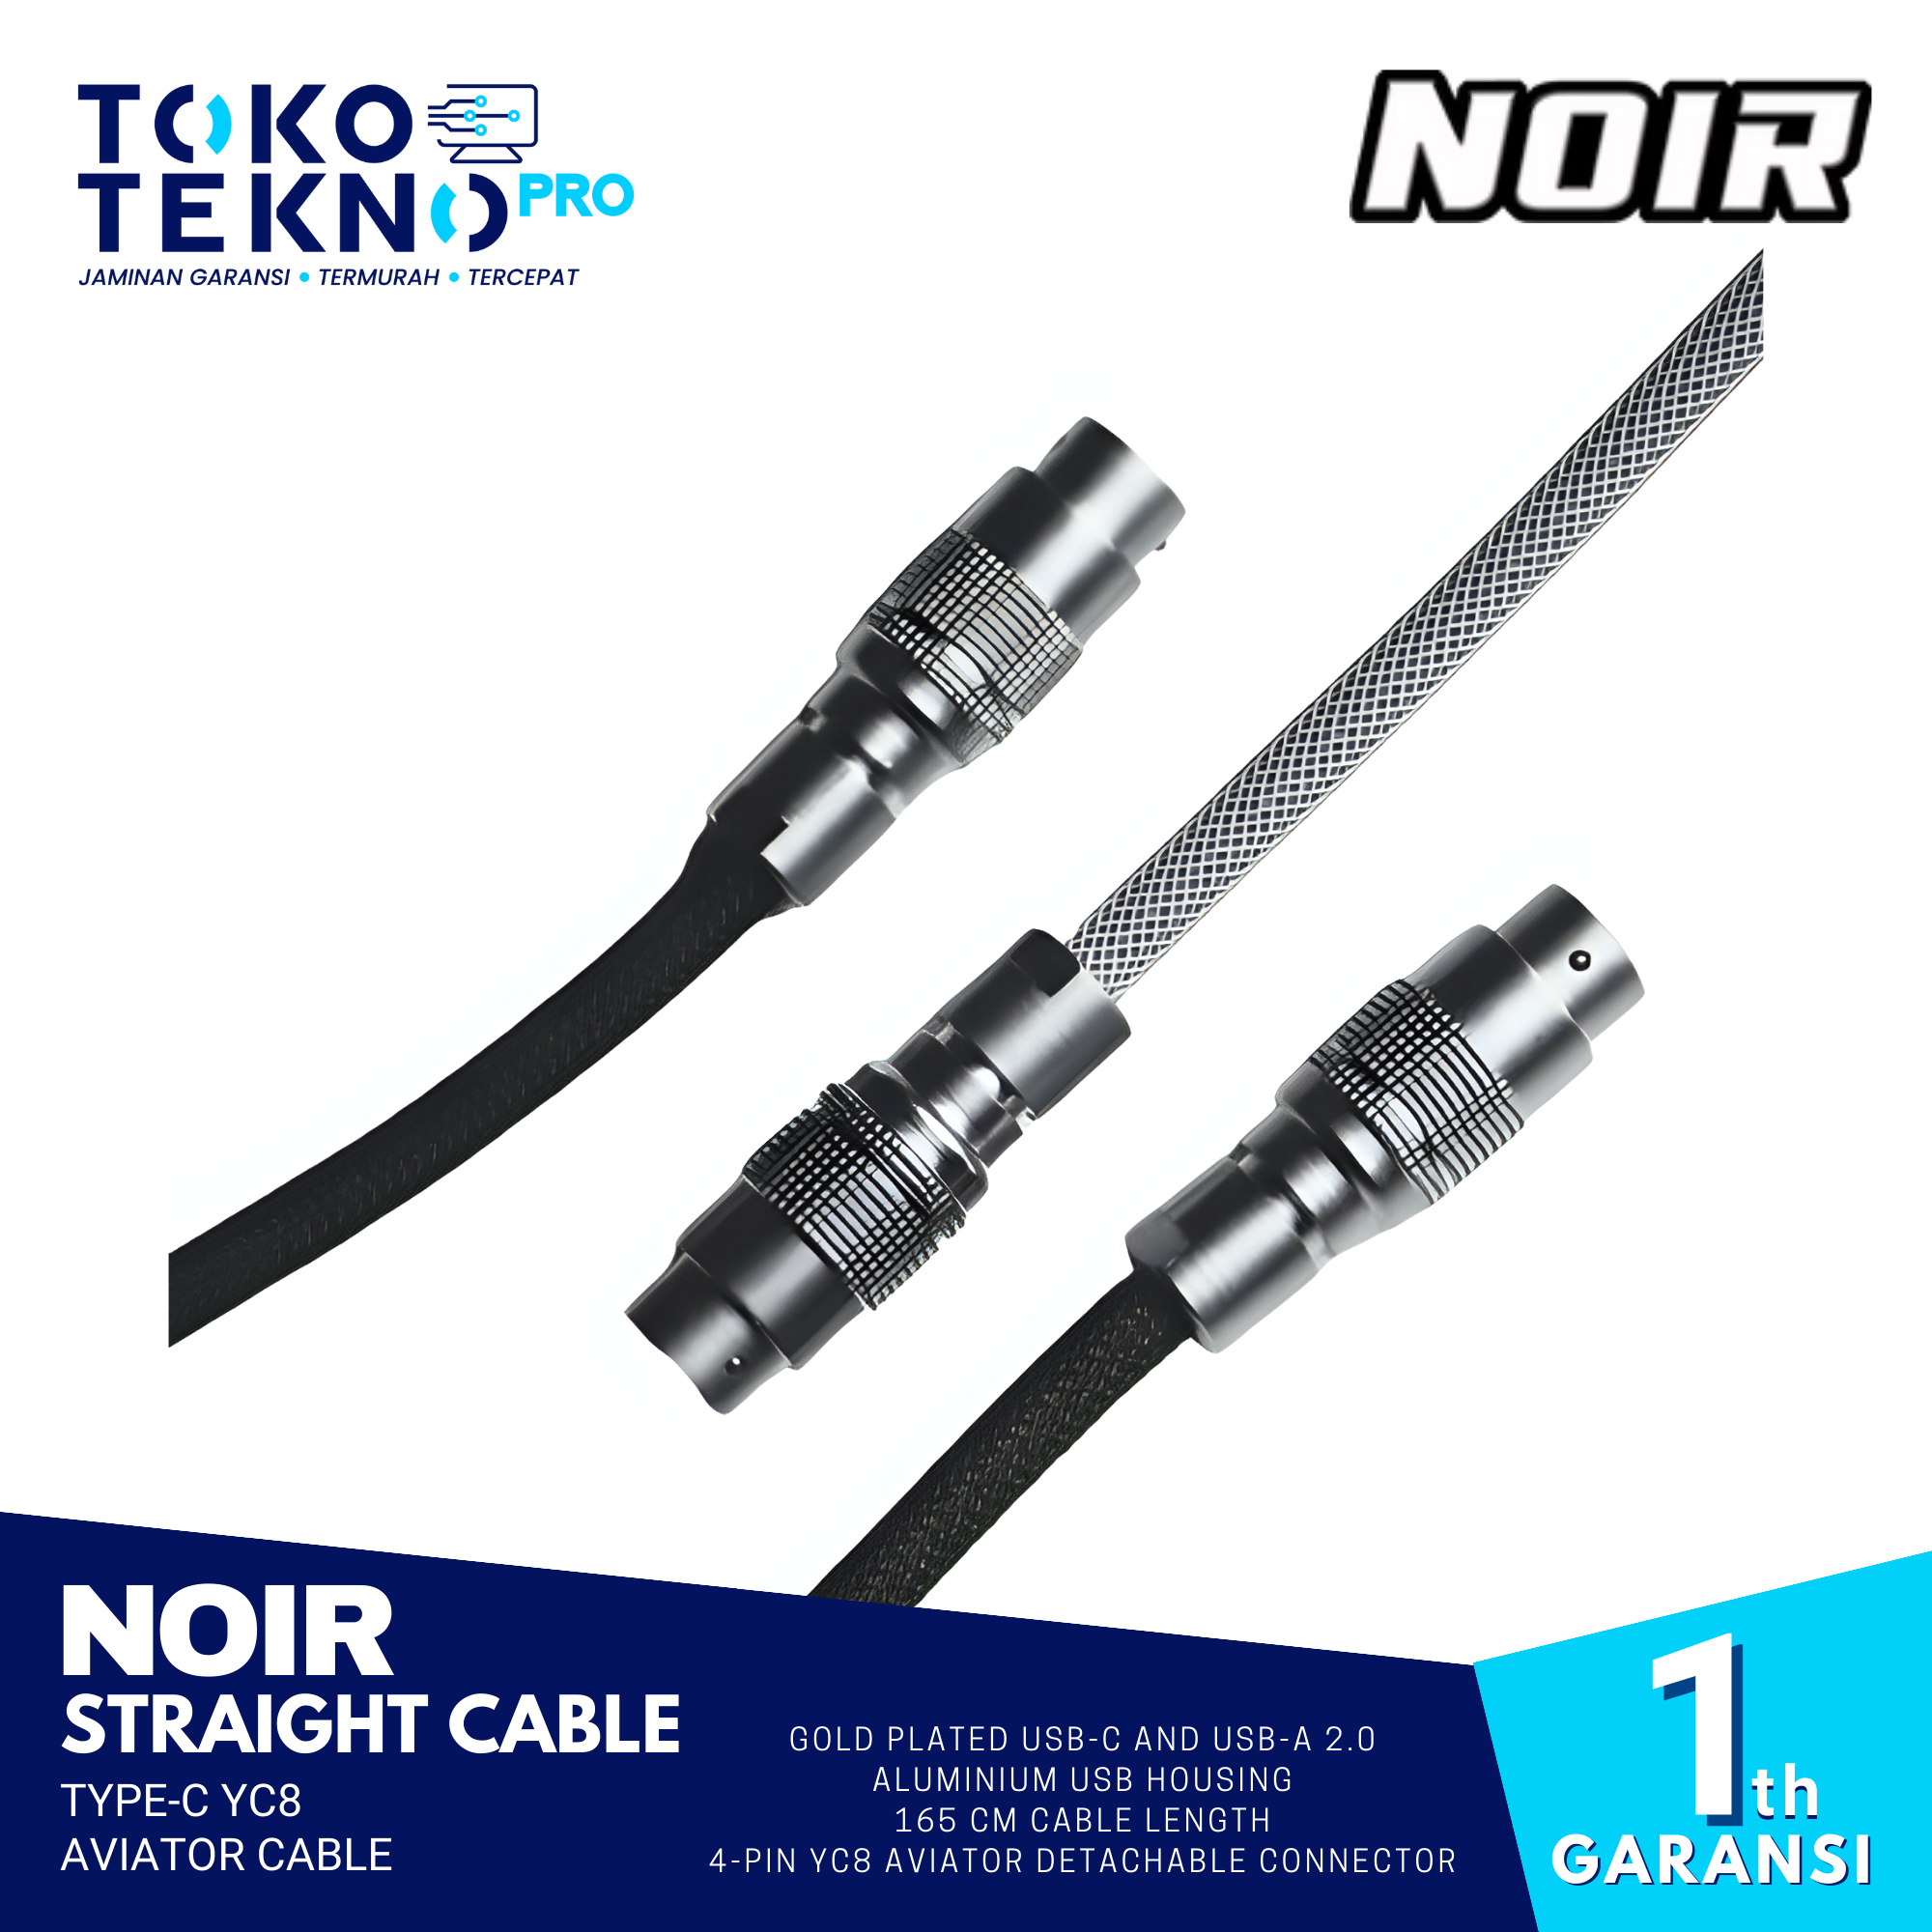 Noir Straight Cable Type C YC8 Aviator Cable